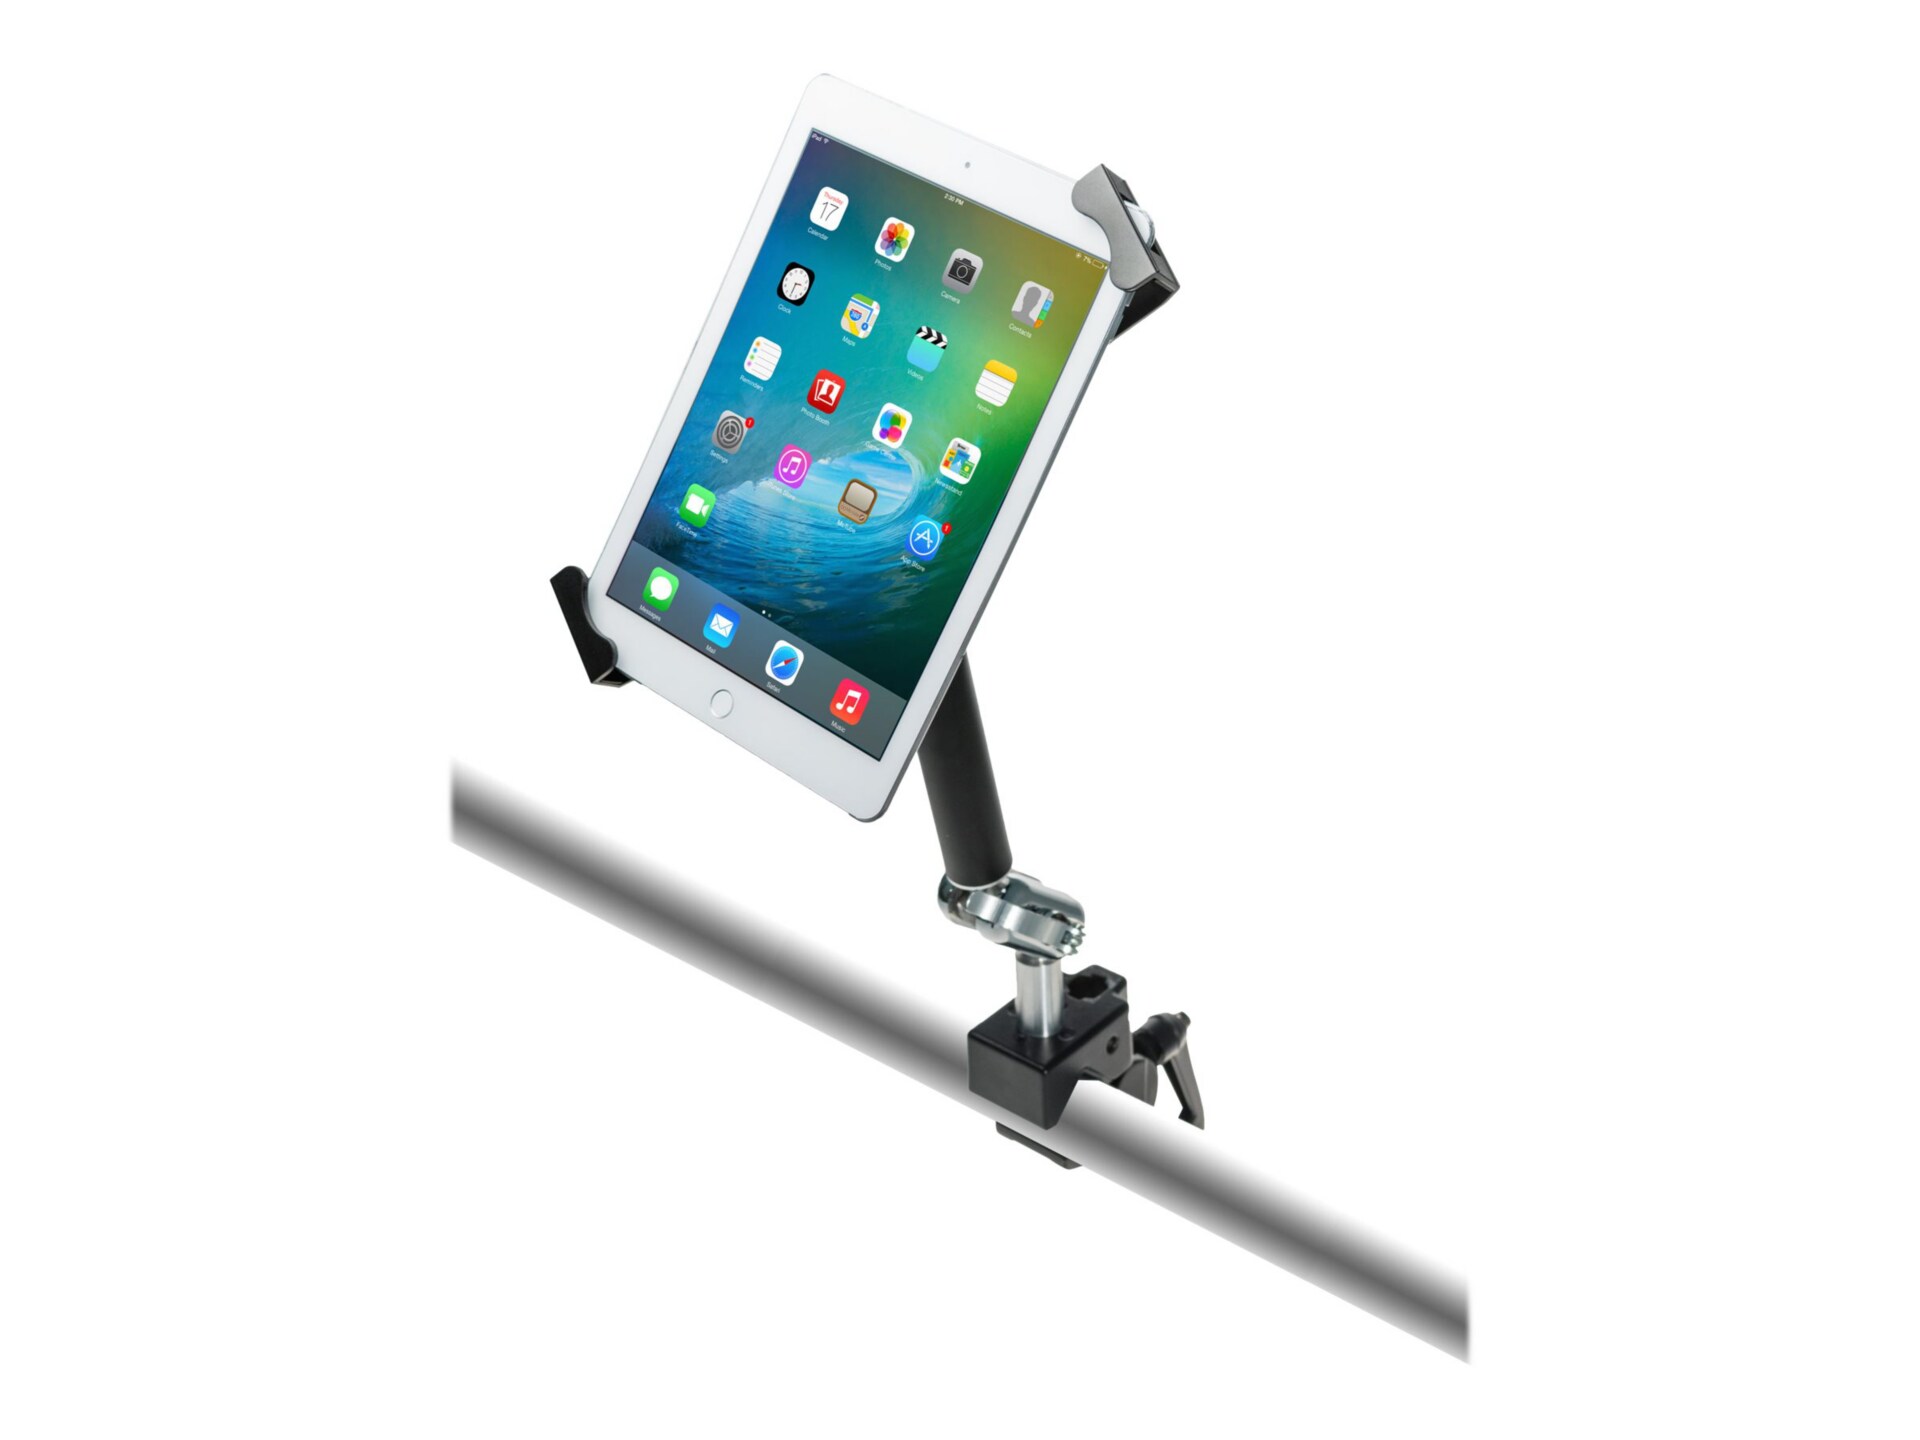 CTA Digital Heavy-Duty Security Pole Clamp for 7-14 Inch Tablets, including iPad 10.2-inch (7th/ 8th/ 9th Generation)